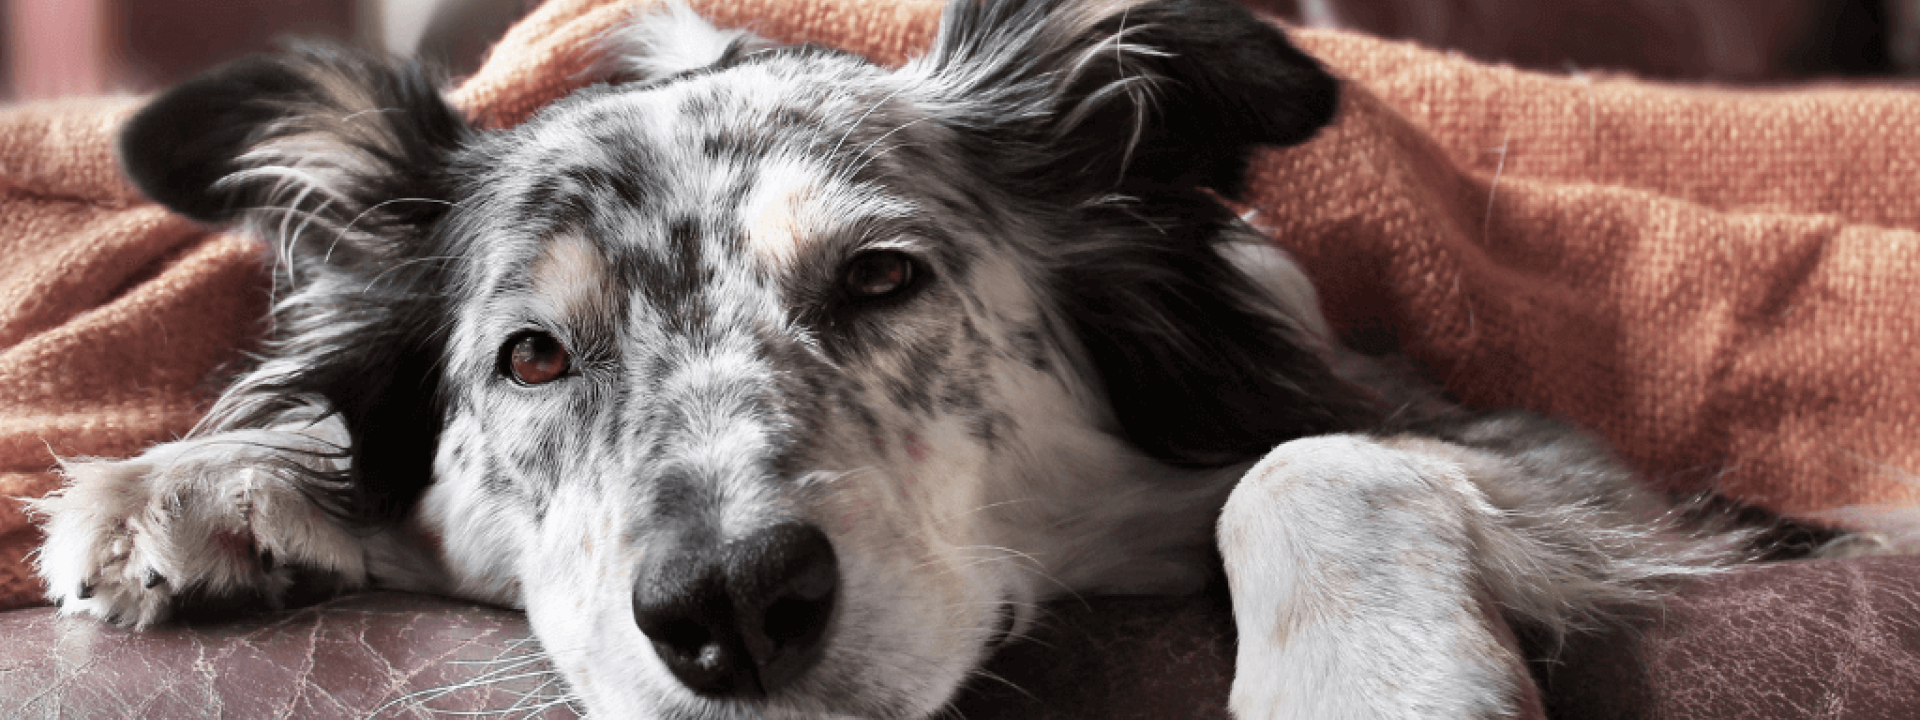 canine influenza prevention and tips